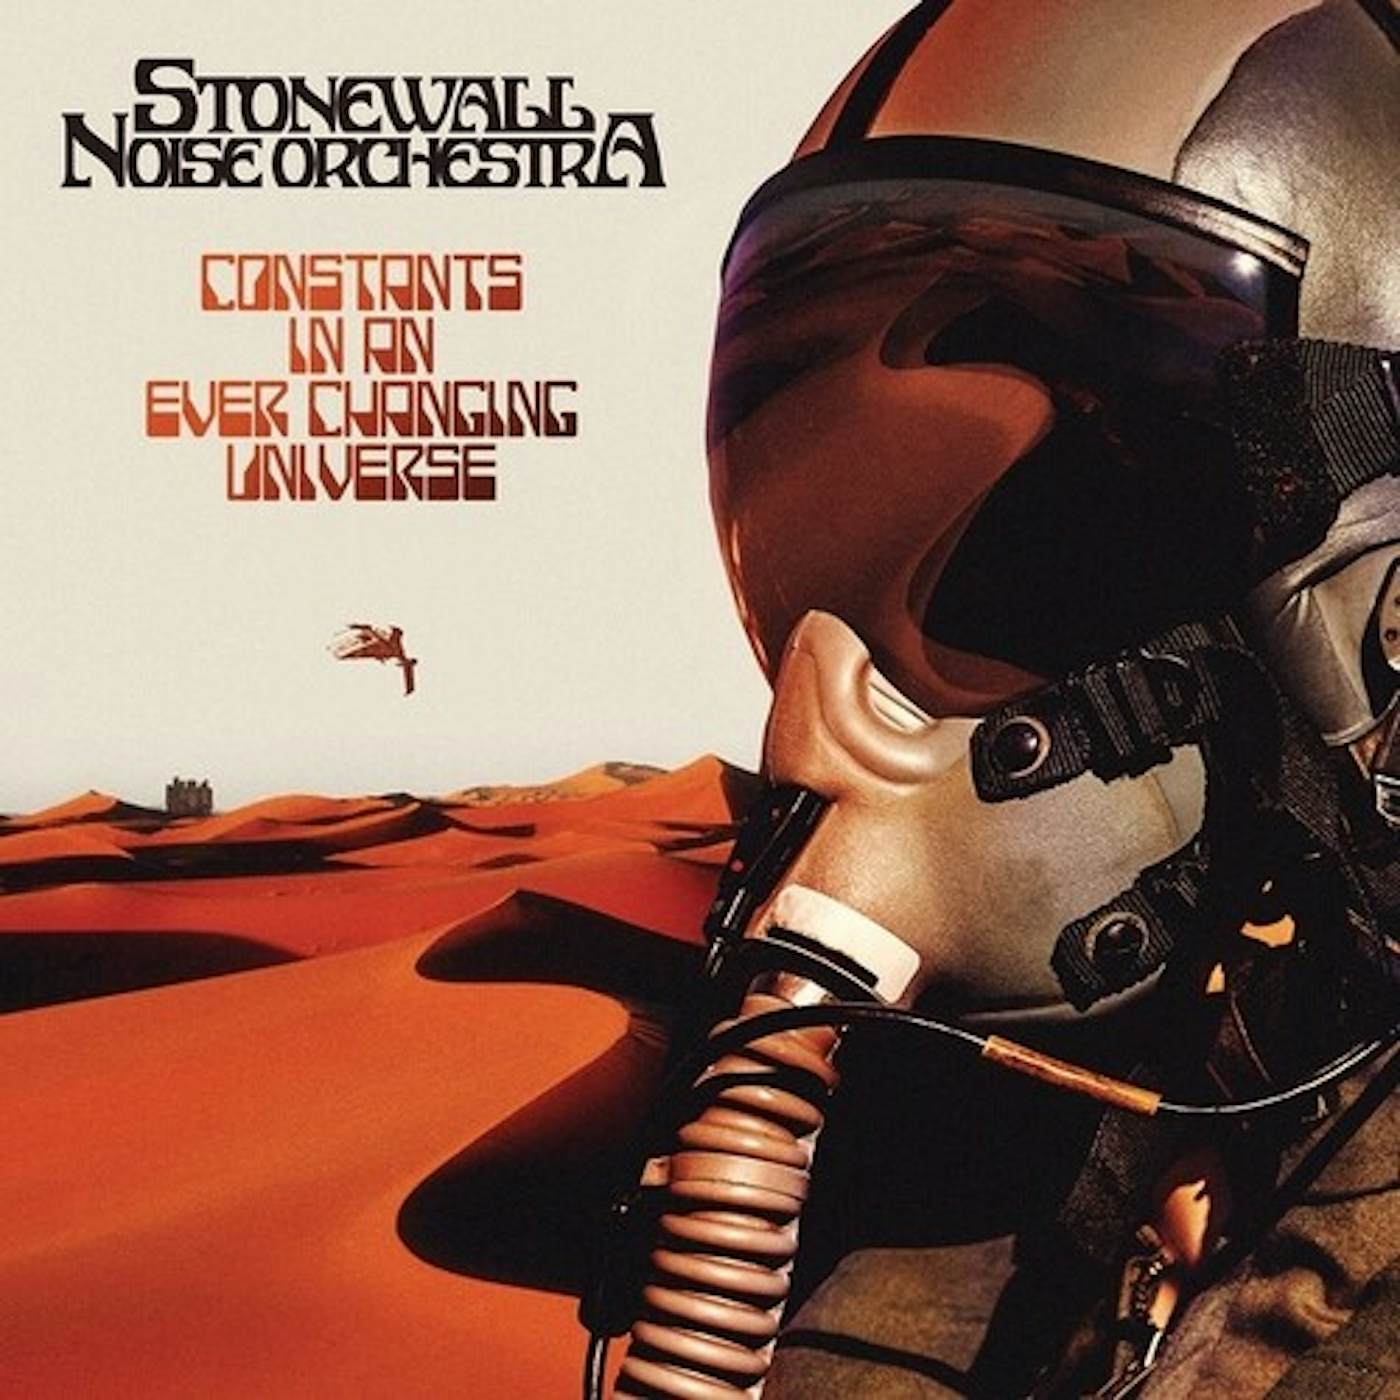 STONEWALL NOISE ORCHESTRA CONSTANTS IN AN EVER CHANGING UNIVERSE CD